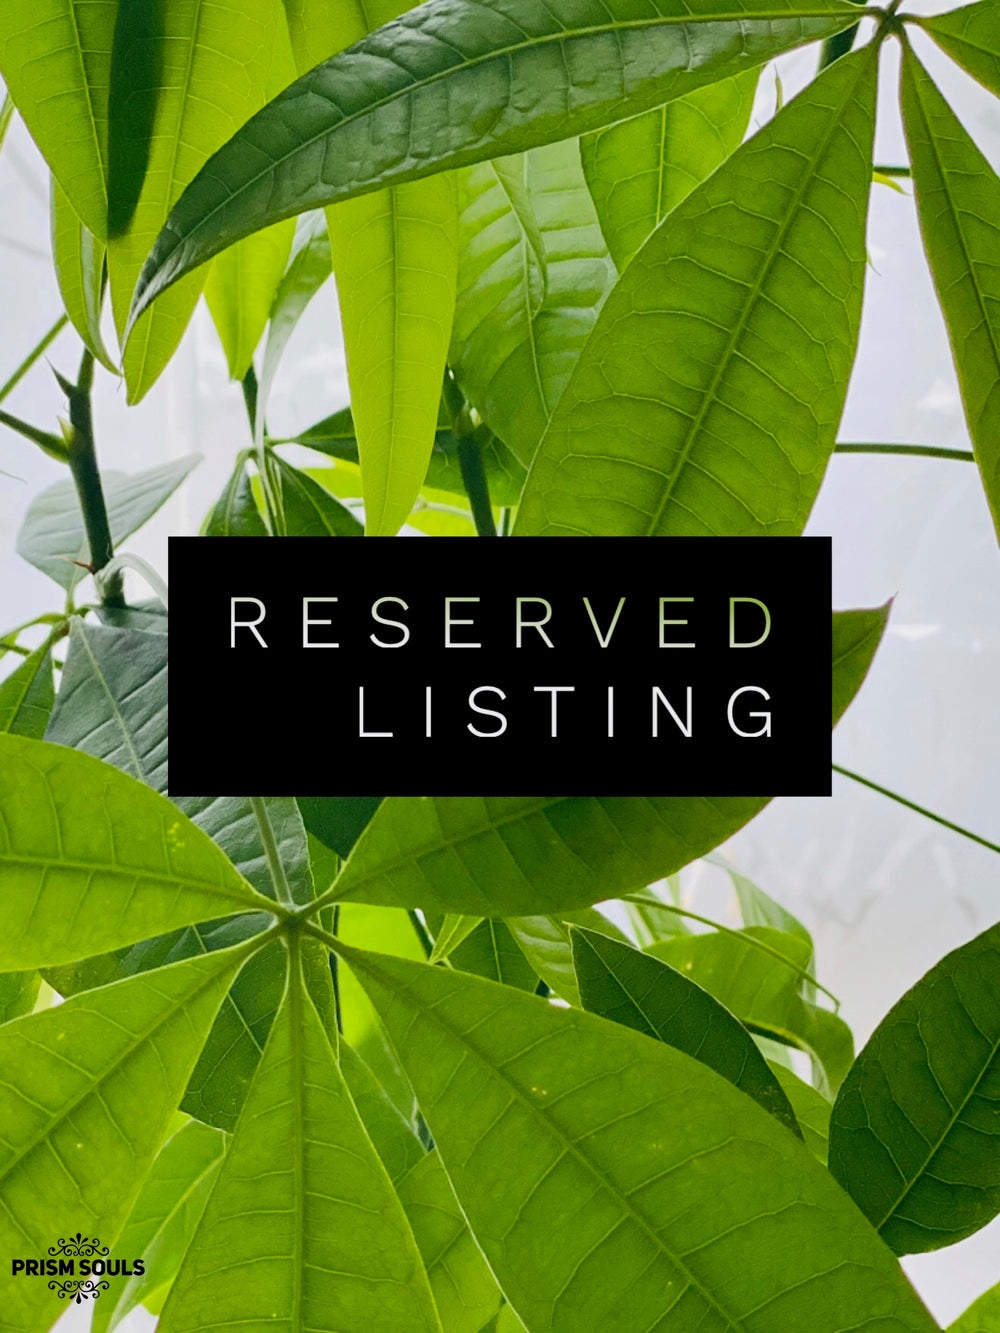 RESERVED LISTING - wellthisismylifenow